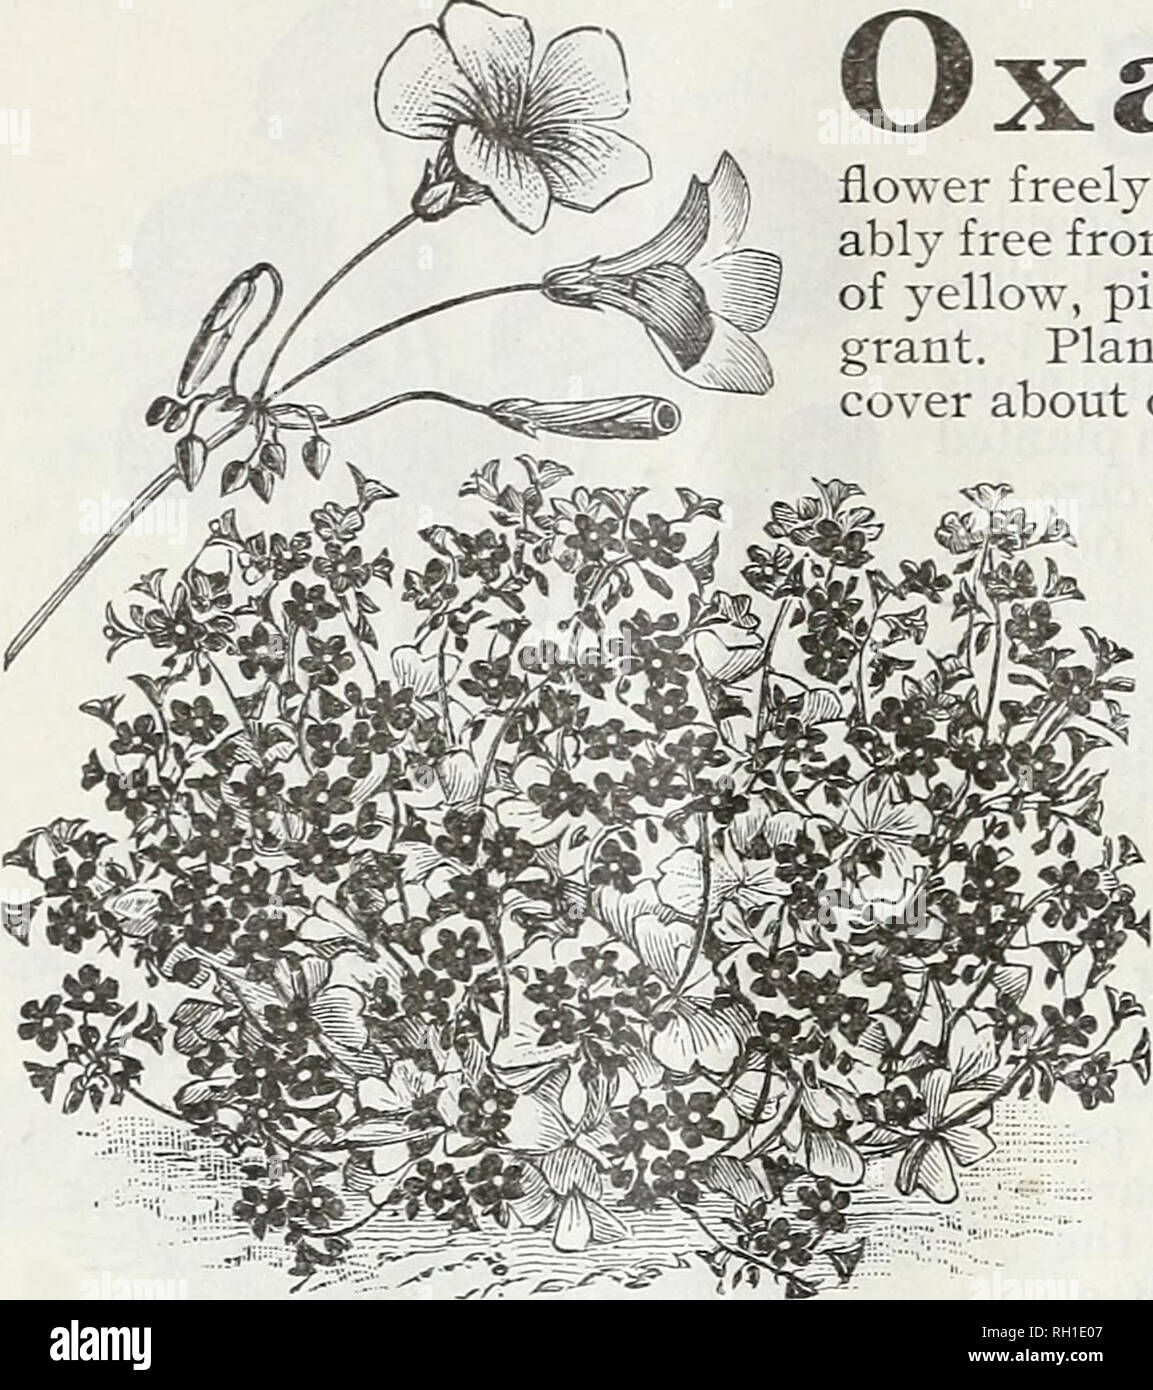 . Bulbs and seeds : autumn 1905. Seeds Catalogs; Bulbs (Plants) Catalogs; Vegetables Seeds Catalogs. 22 D. M. FERRY &amp; CO., DETROIT, MICH.. ),^ ^^^ 1 â¢ Admirably adapted to house â¢â â ^â ' ' â B &quot;V&quot; C^ I 1 ^ culture, and nothing is prettier ^-^ -^^- *^ â *â â¢*â *^ for window plants, as they flower freely, are in bloom a long time, and are remark- ably free from insects. The flowers are of various shades of yellow, pink, red and white and are often very fra- grant. Plant in pots, six or eight bulbs in a pot, and cover about one inch deep. each. doz. Oxalis Multiflora Alba, whit Stock Photo